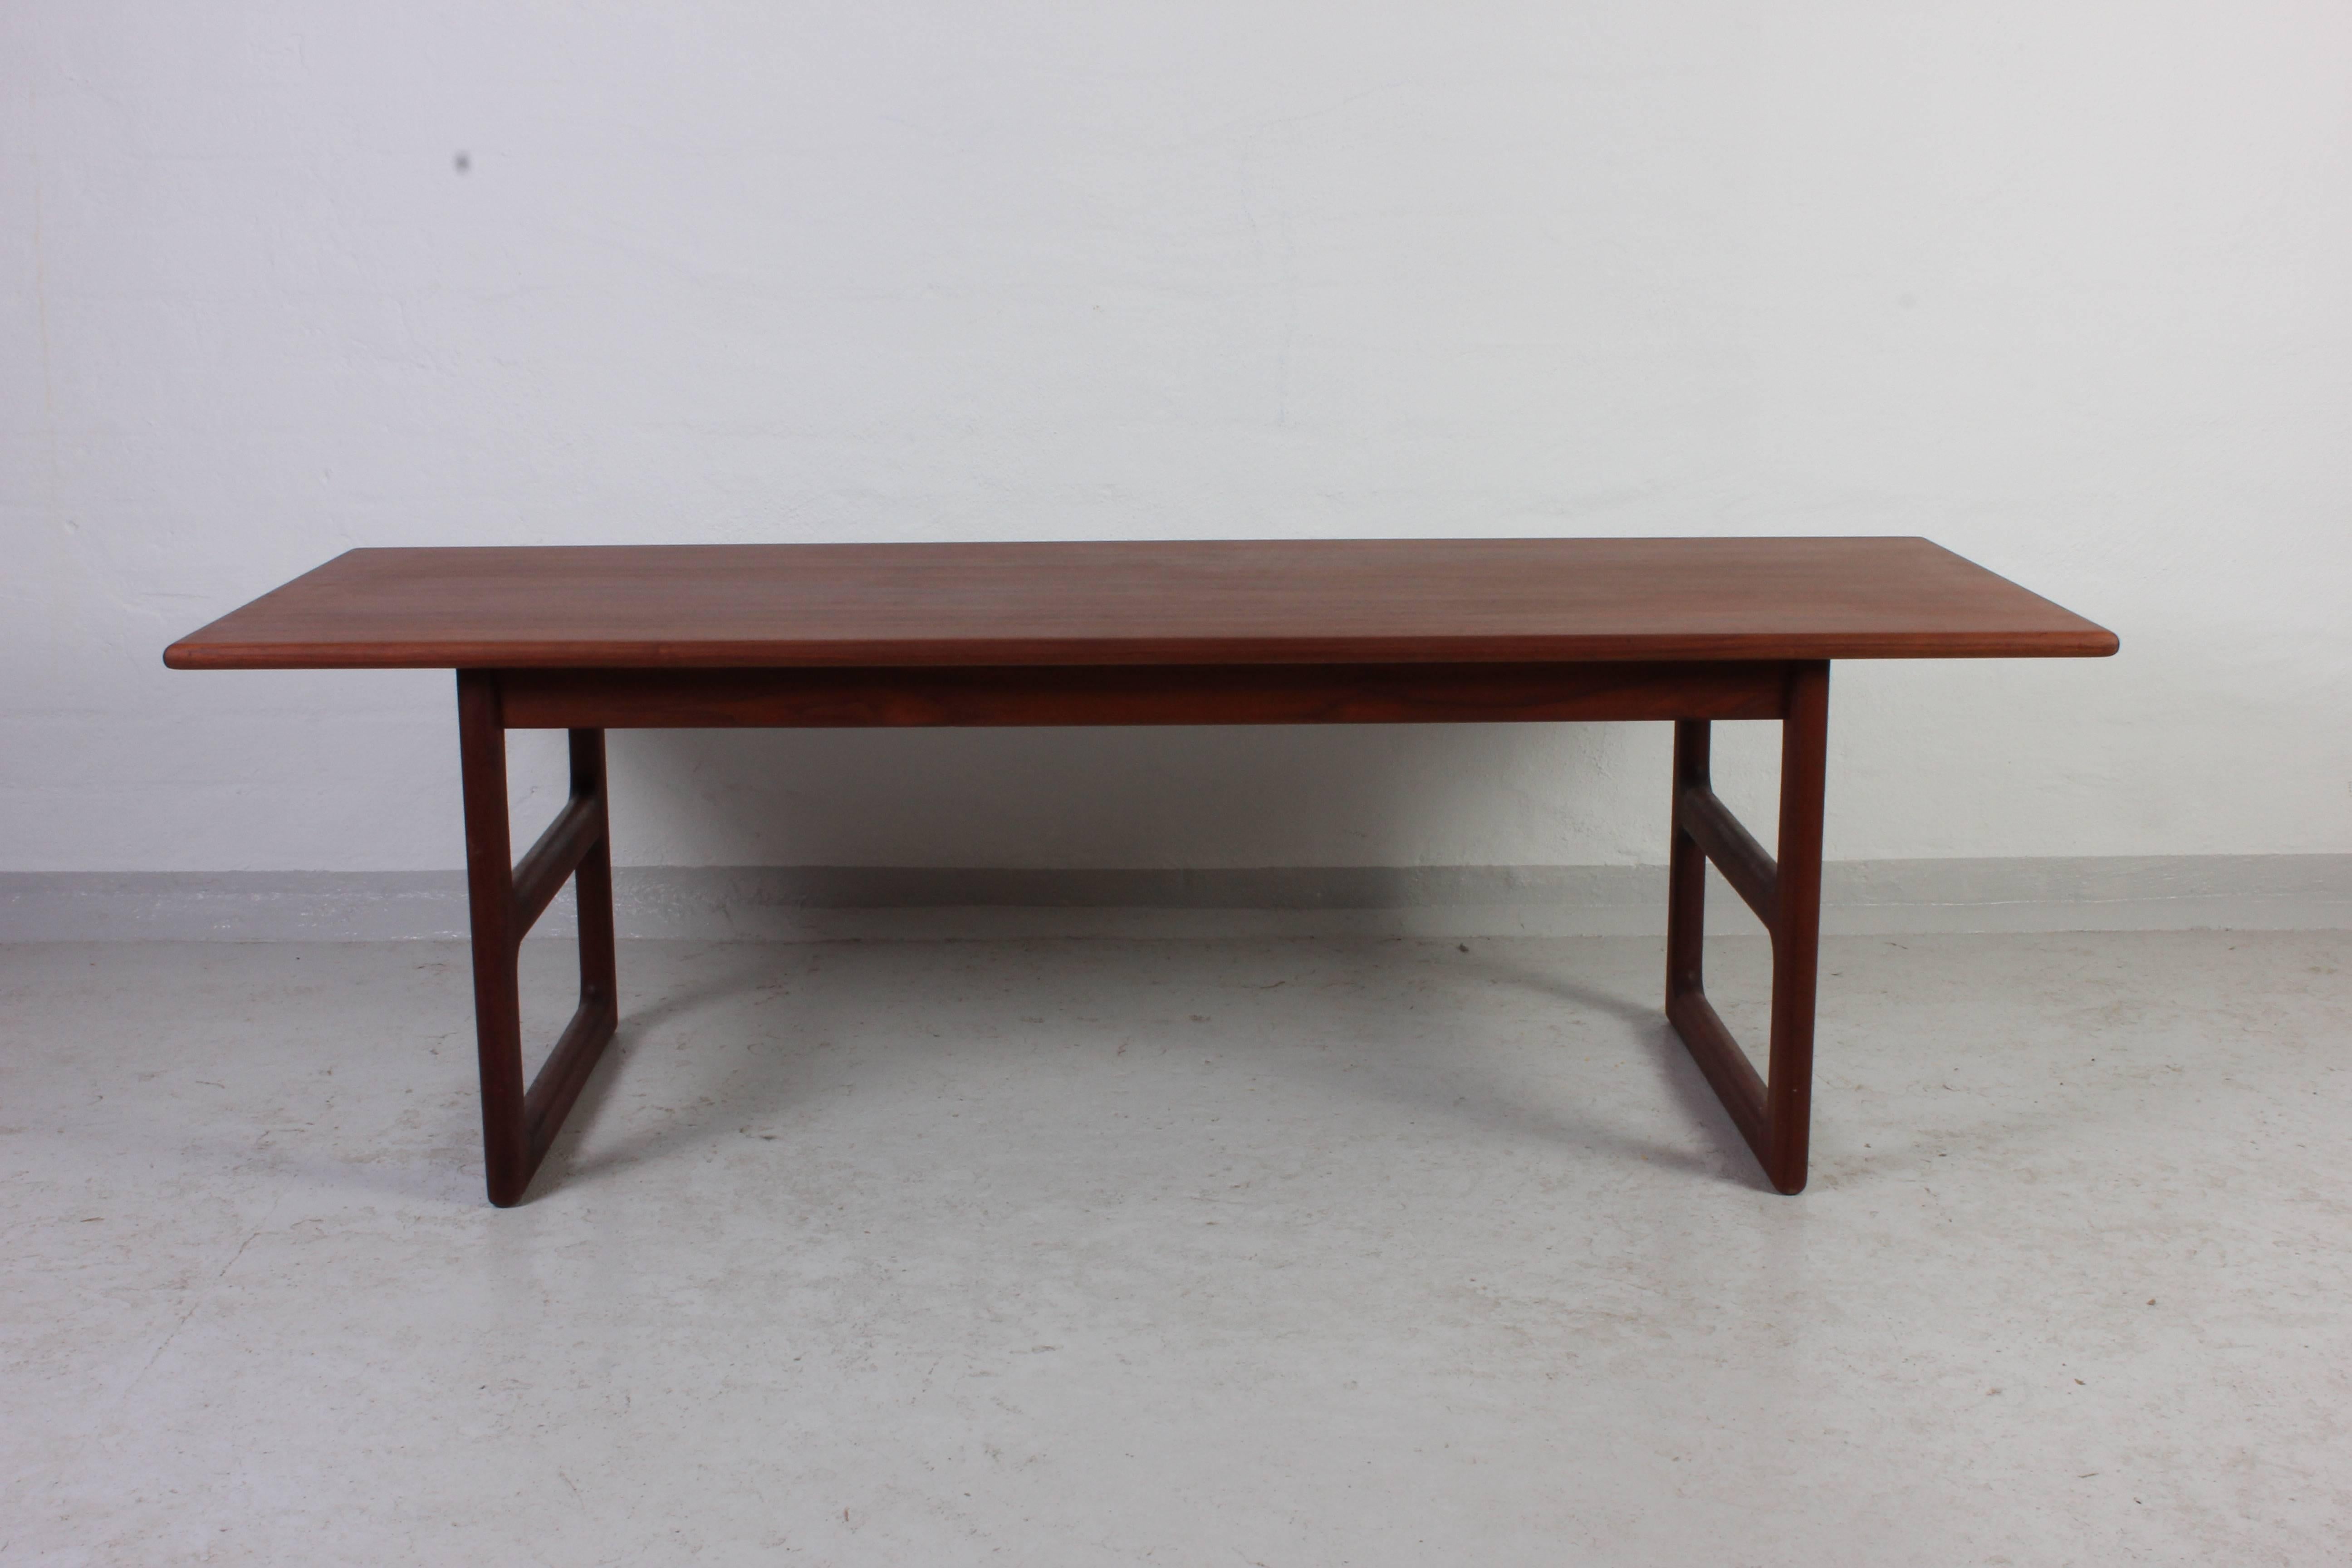 This midcentury Danish teak coffee table is in very good vintage condition. The table has sculptured teak legs and top of high quality.

